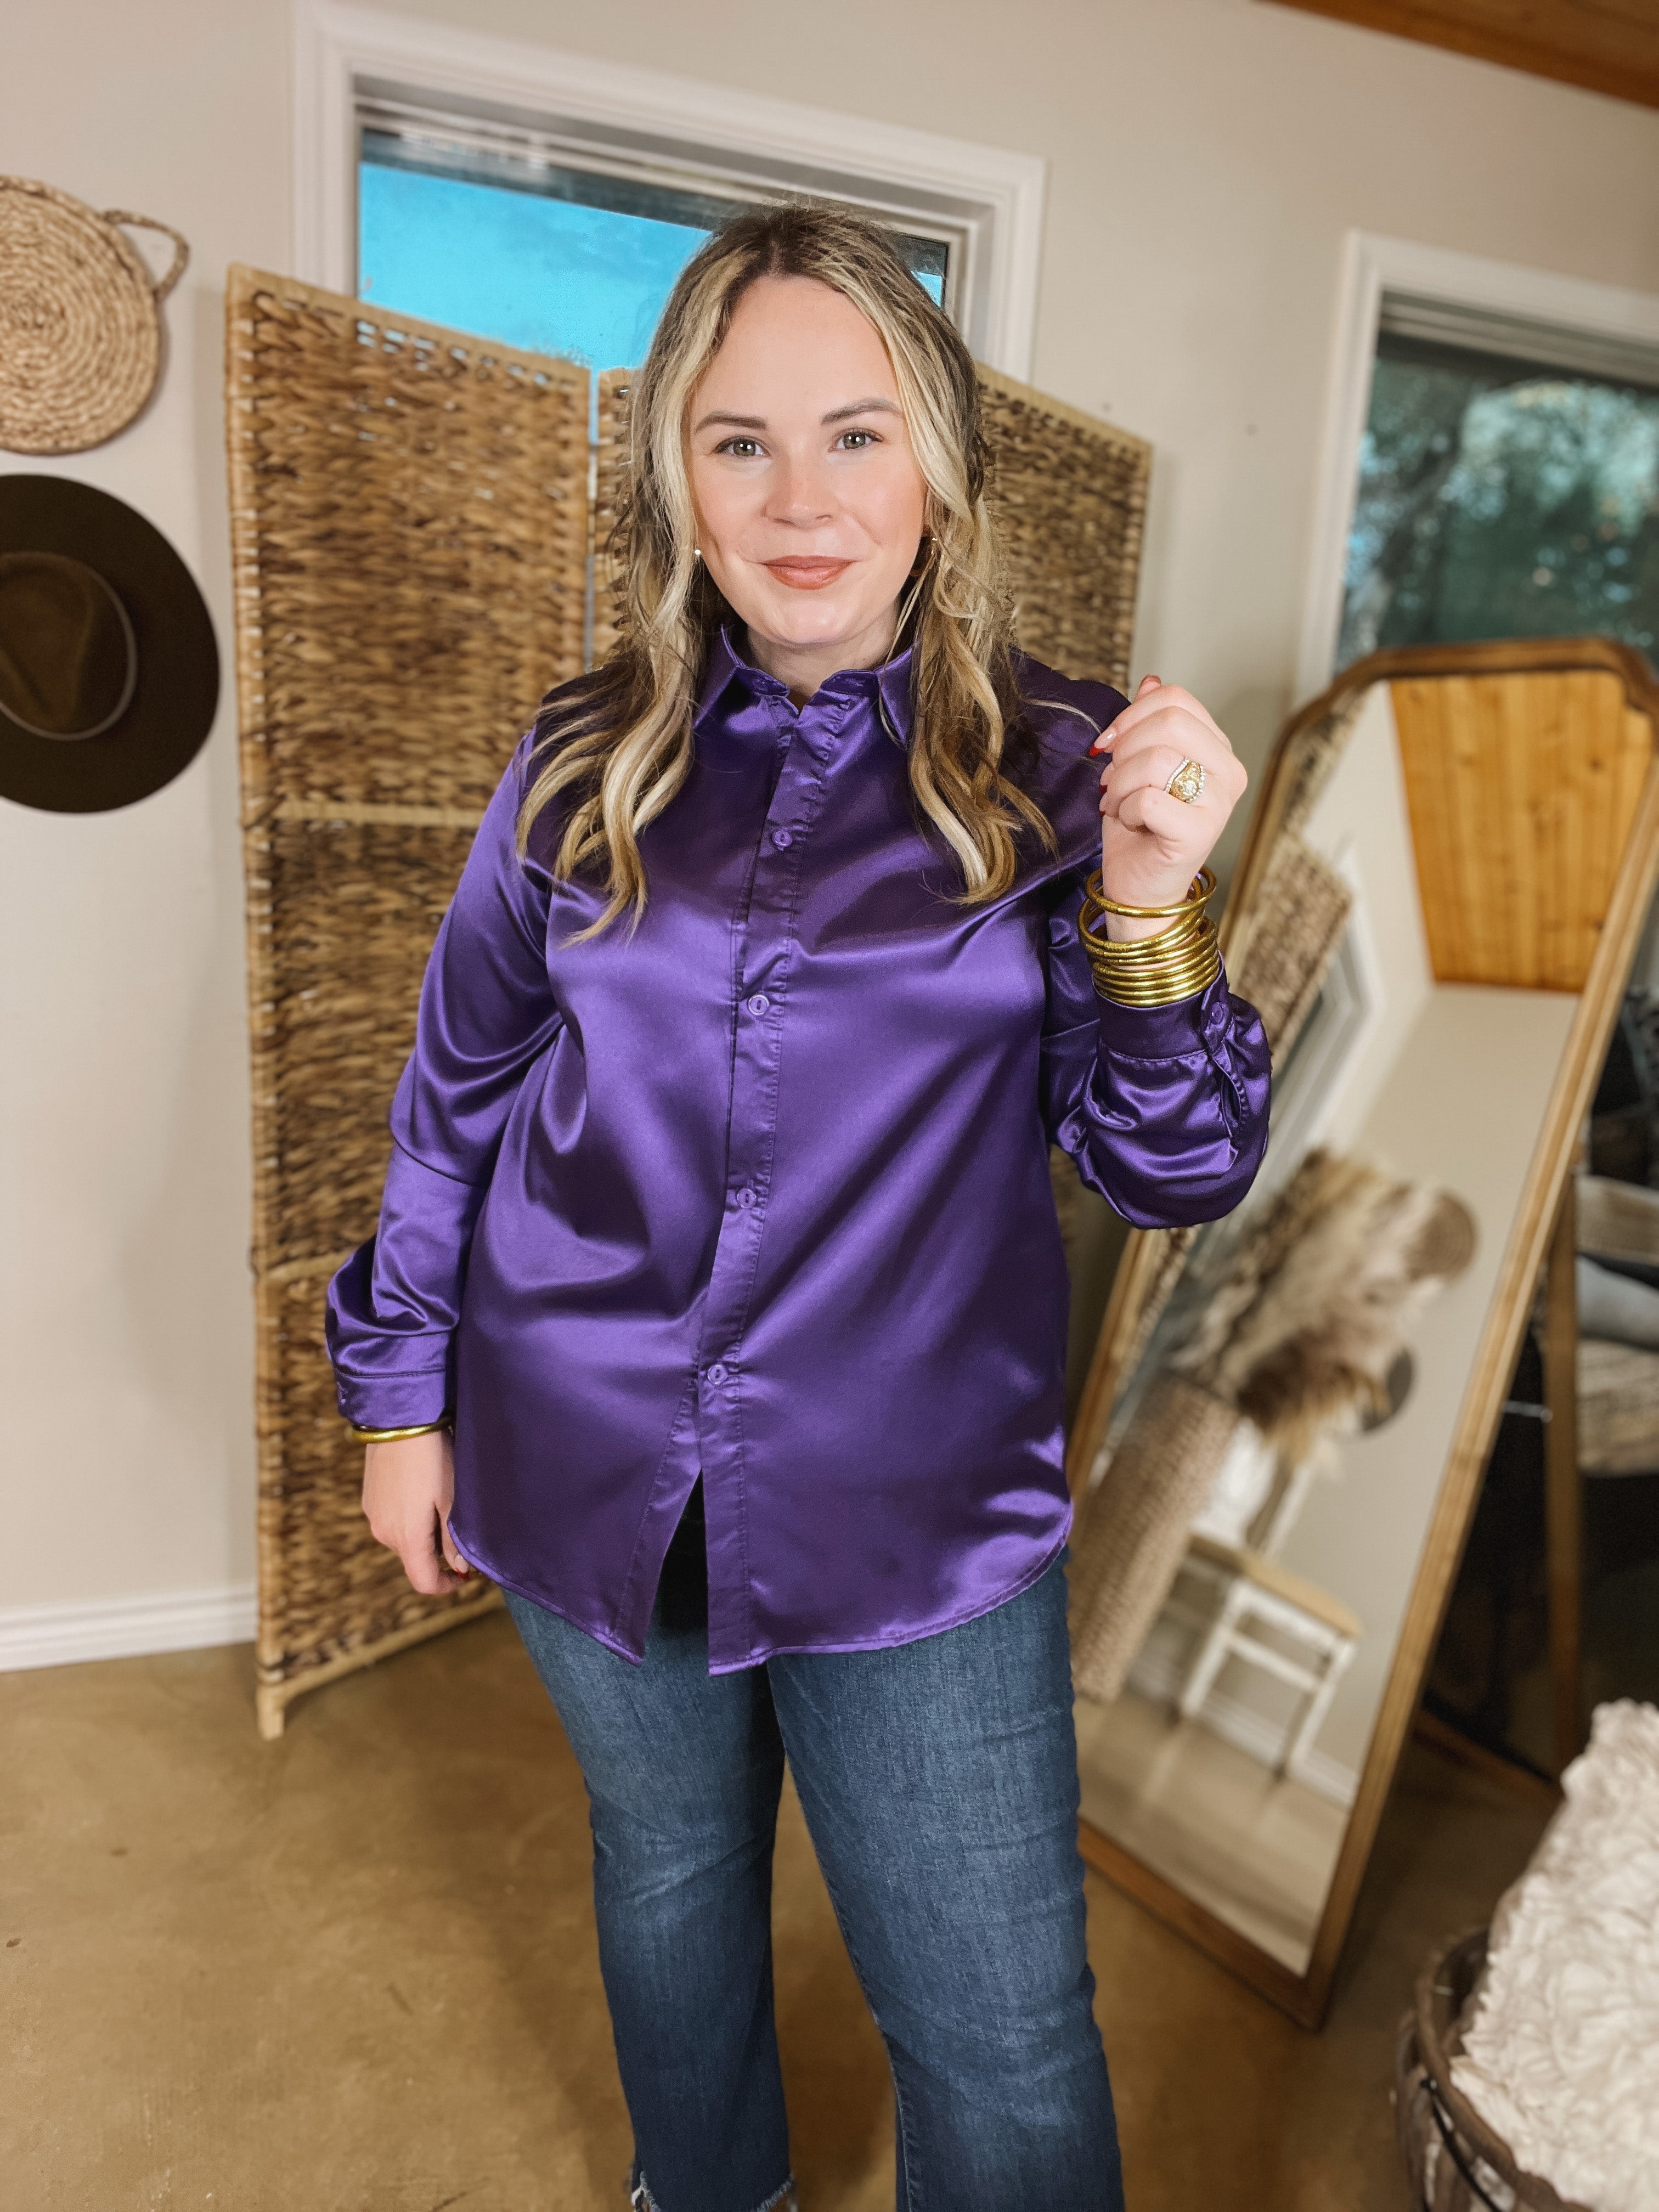 Down To Disco Satin Long Sleeve Button Up Top in Purple - Giddy Up Glamour Boutique